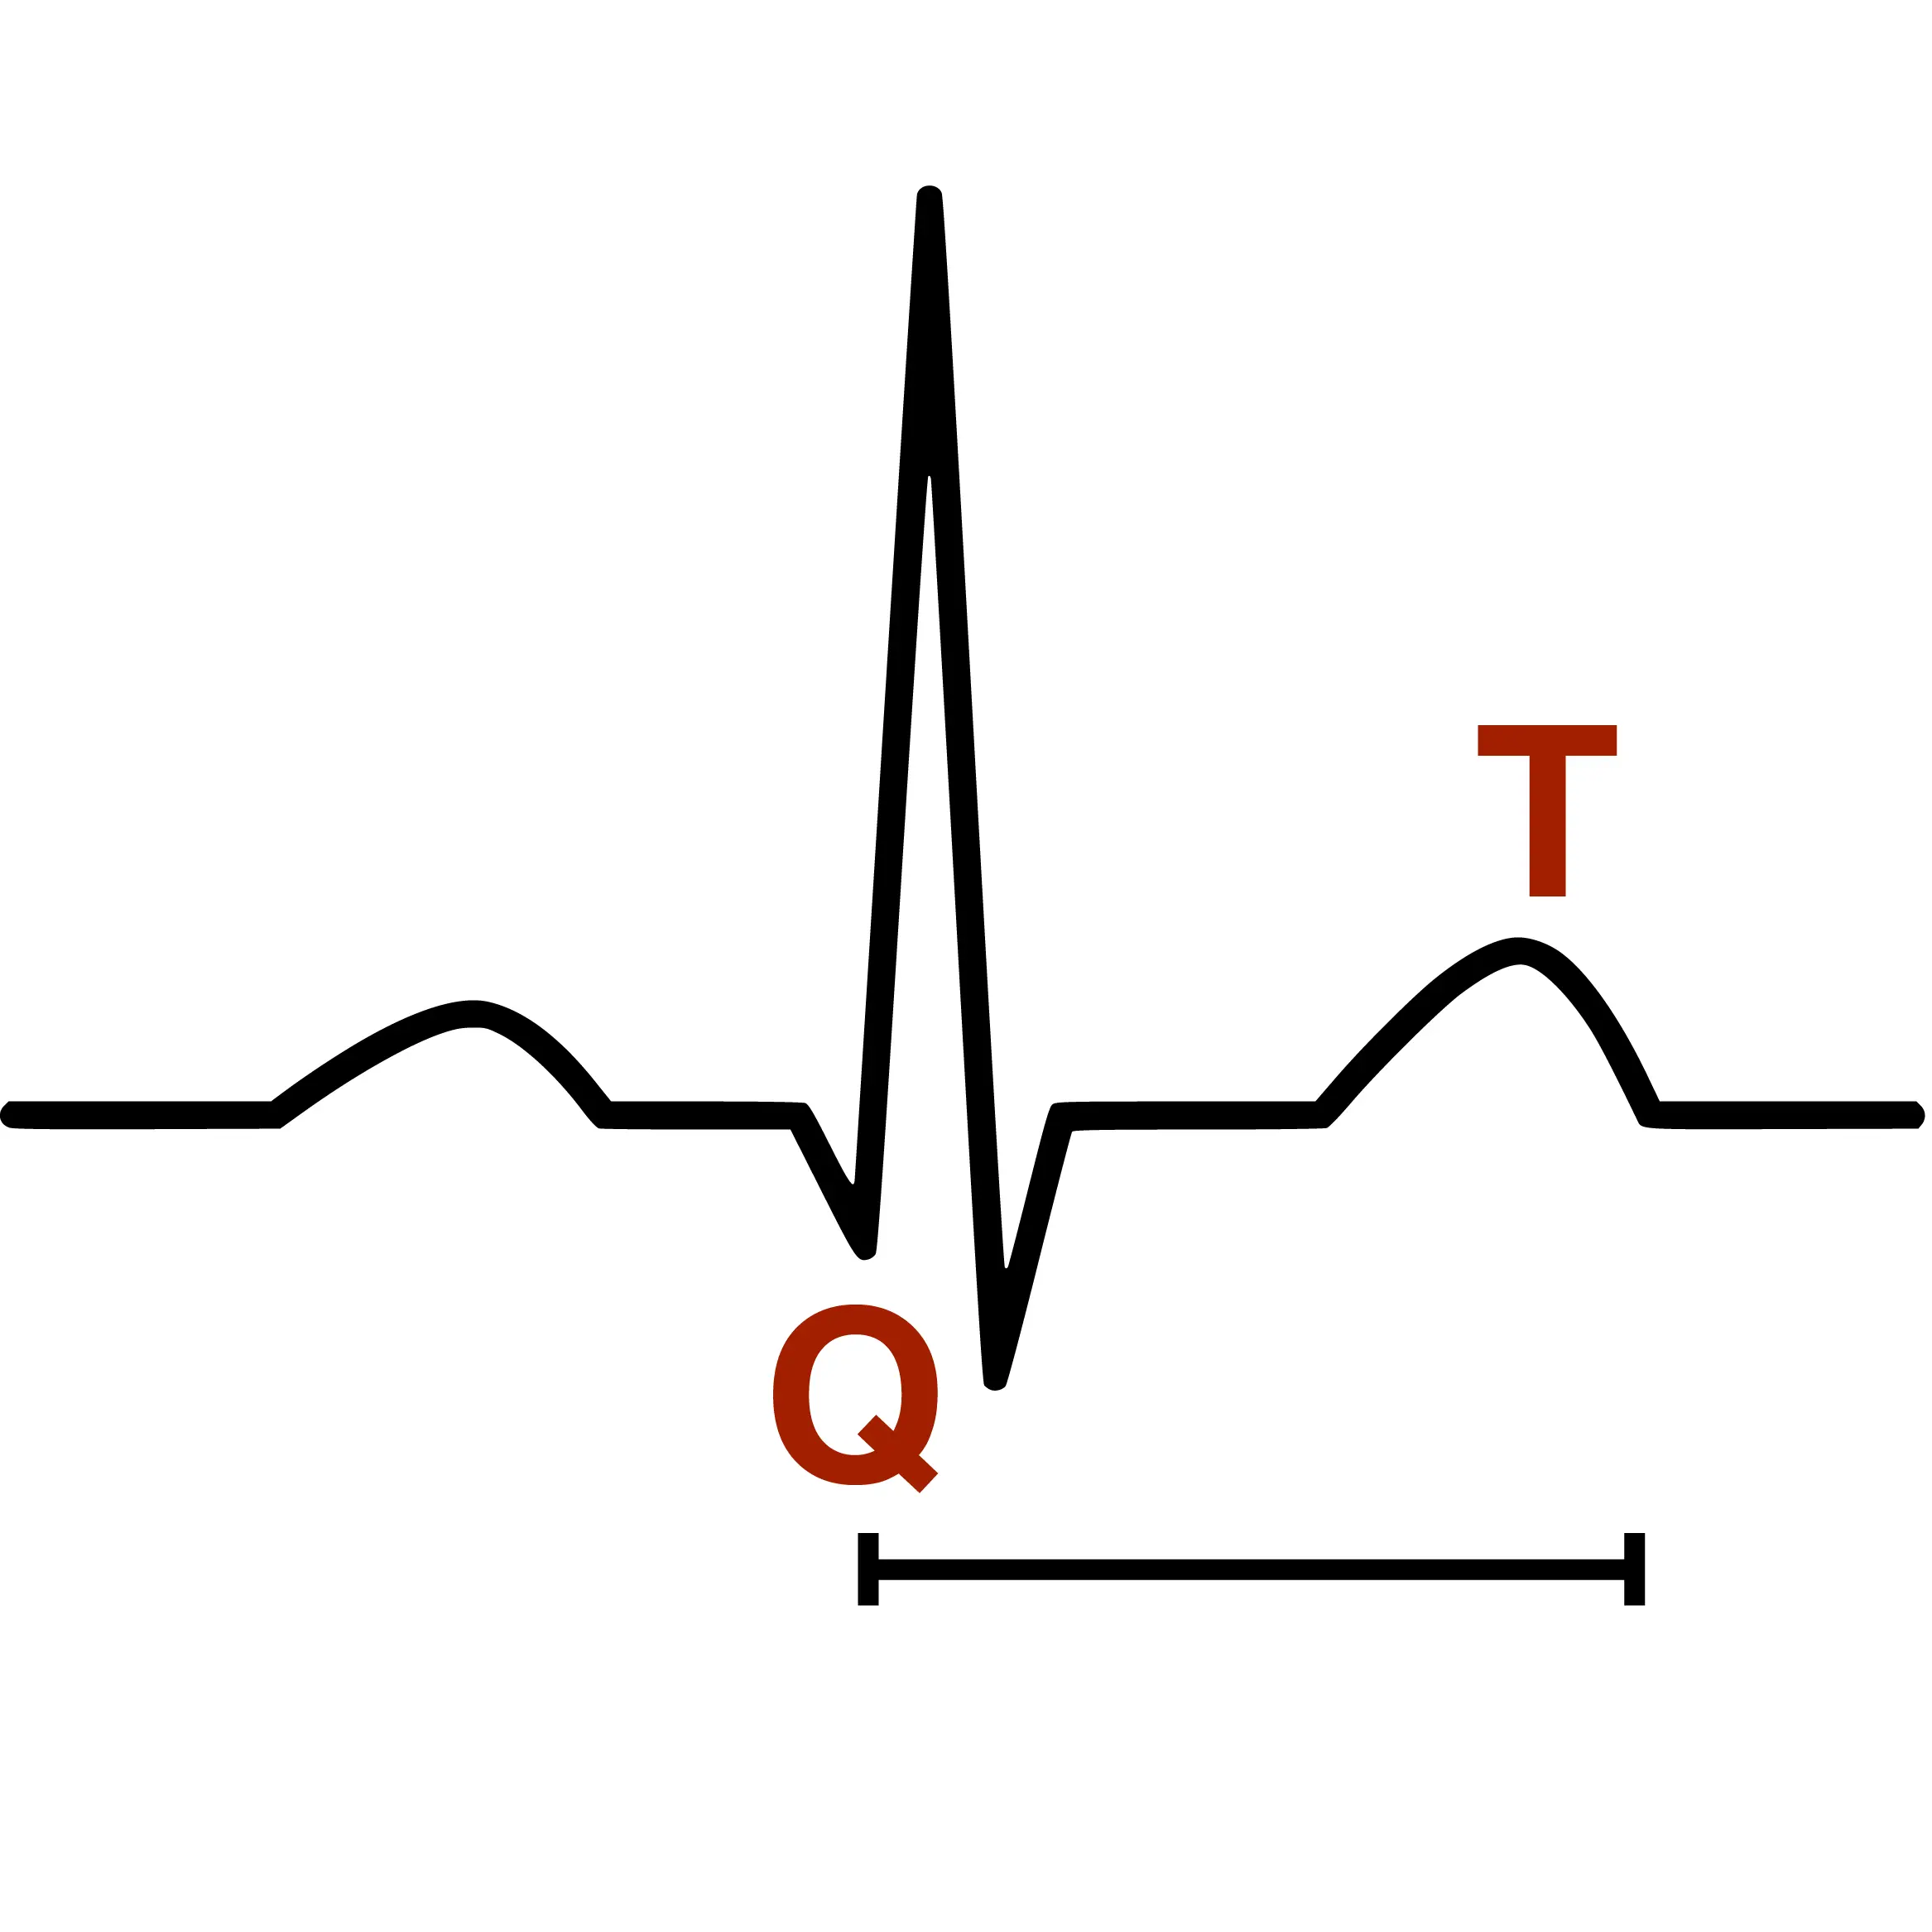 The QT interval is the time between the Q and the T wave in an electrocardiogram (ECG).